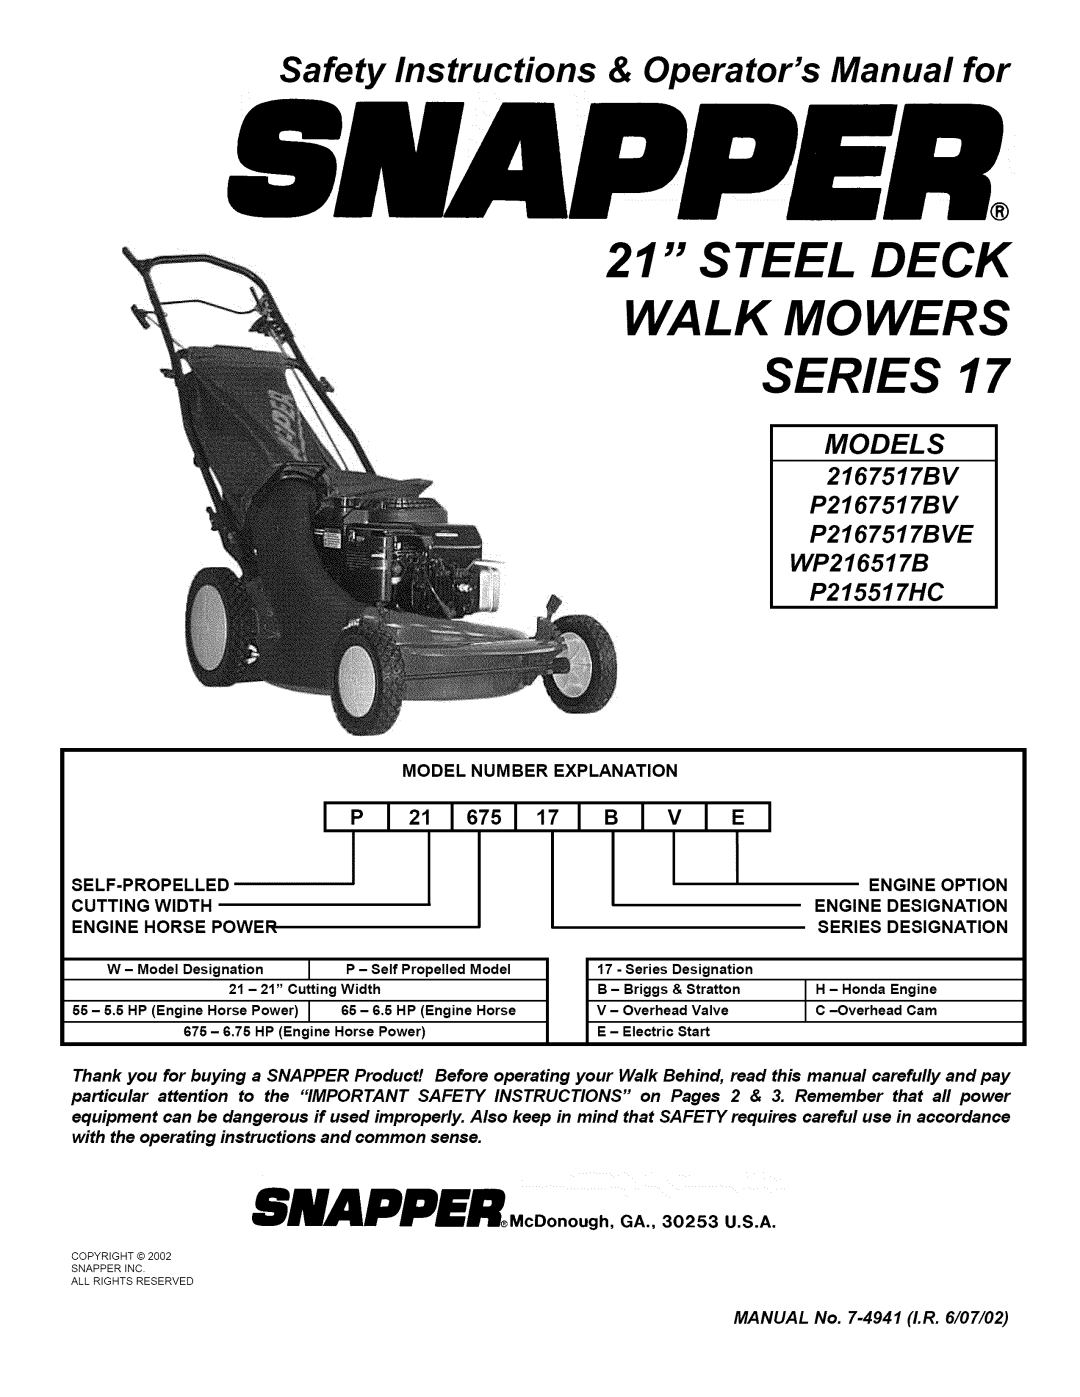 Snapper P2167517BVE important safety instructions Steel Deck Walk Mowers Series, 8NAPPER.coonou0.o, Models, P215517HC 